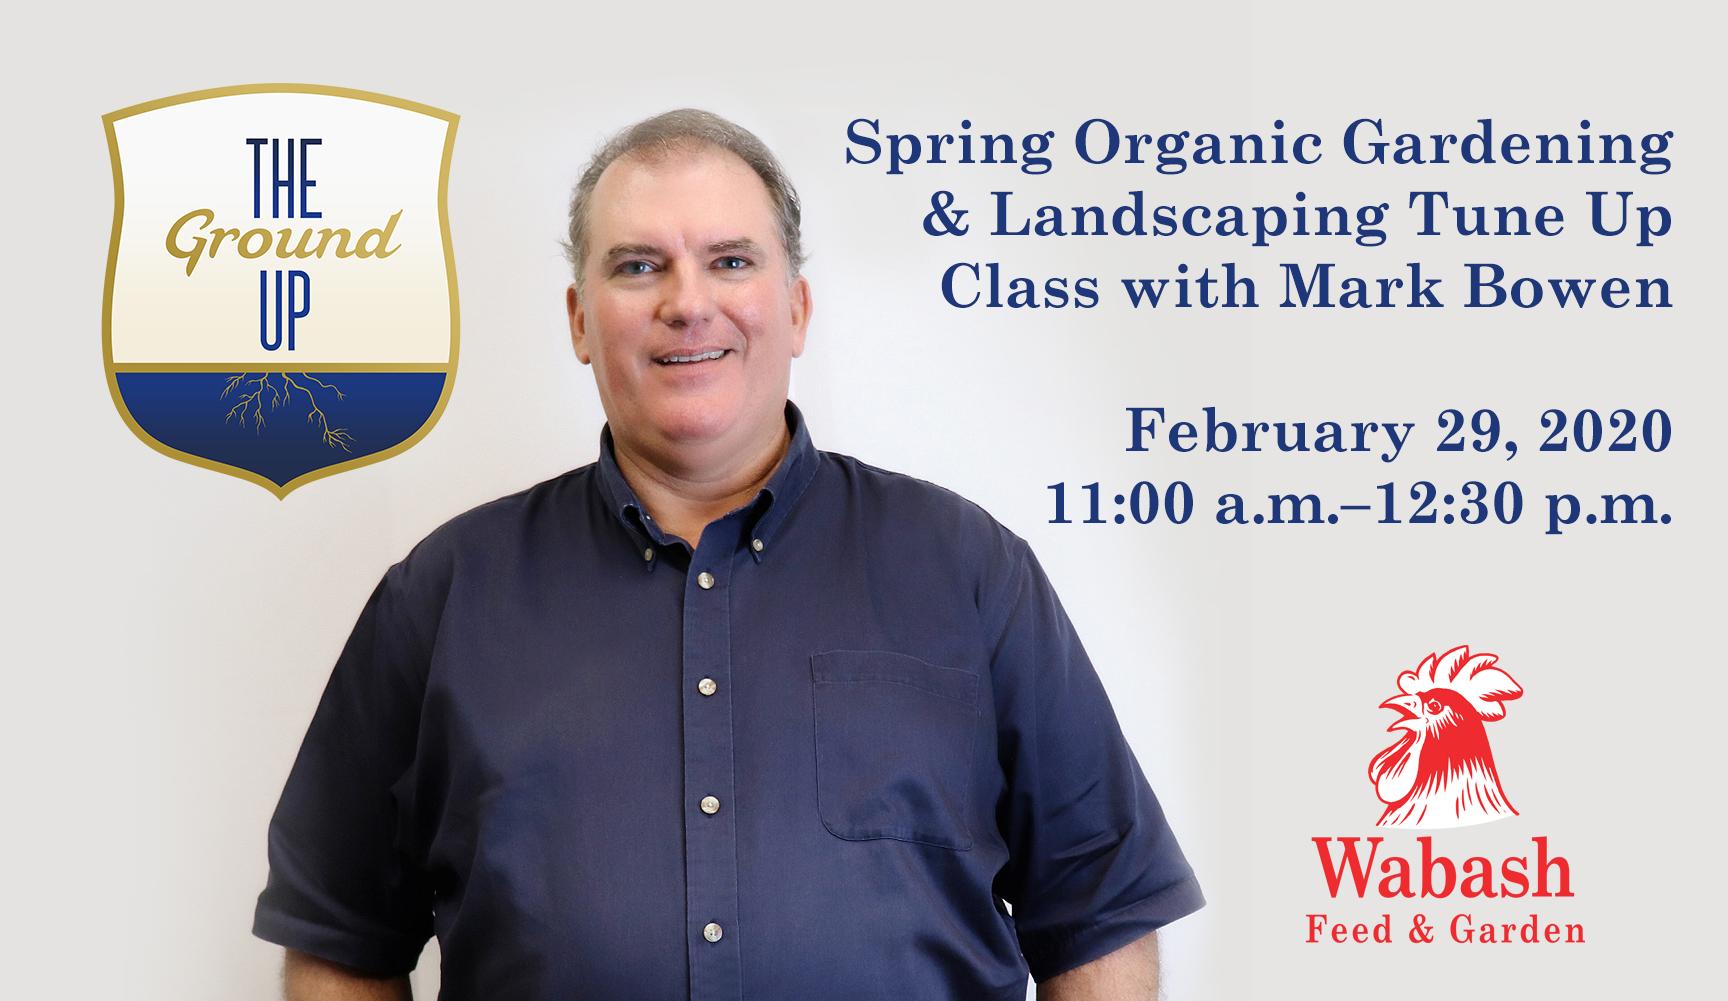 Spring Organic Gardening & Landscaping Tune Up Class with Mark Bowen